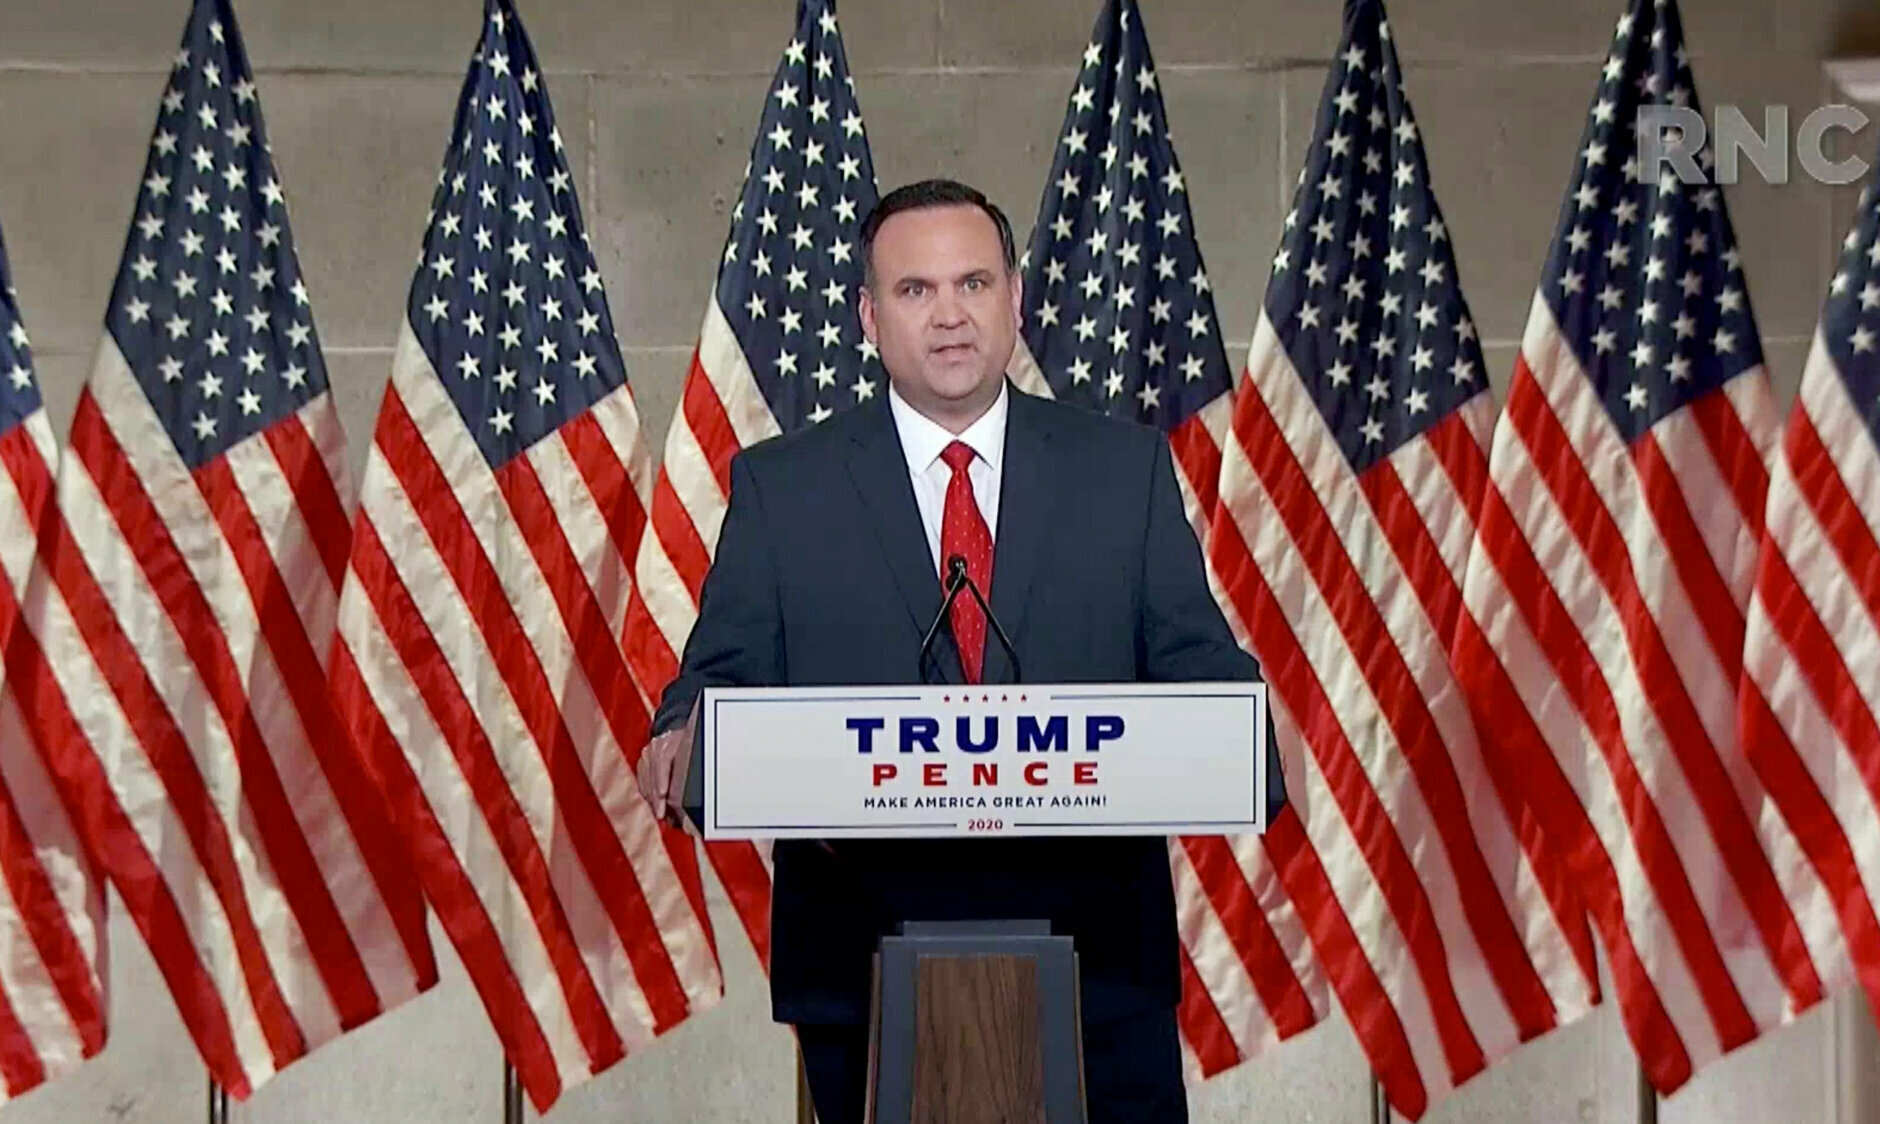 CHARLOTTE, NC - AUGUST 27: (EDITORIAL USE ONLY) In this screenshot from the RNC’s livestream of the 2020 Republican National Convention, Dan Scavino, White House Deputy Chief of Staff for Communications and Director of Social Media, addresses the virtual convention on August 27, 2020. The convention is being held virtually due to the coronavirus pandemic but will include speeches from various locations including Charlotte, North Carolina and Washington, DC. (Photo Courtesy of the Committee on Arrangements for the 2020 Republican National Committee via Getty Images)